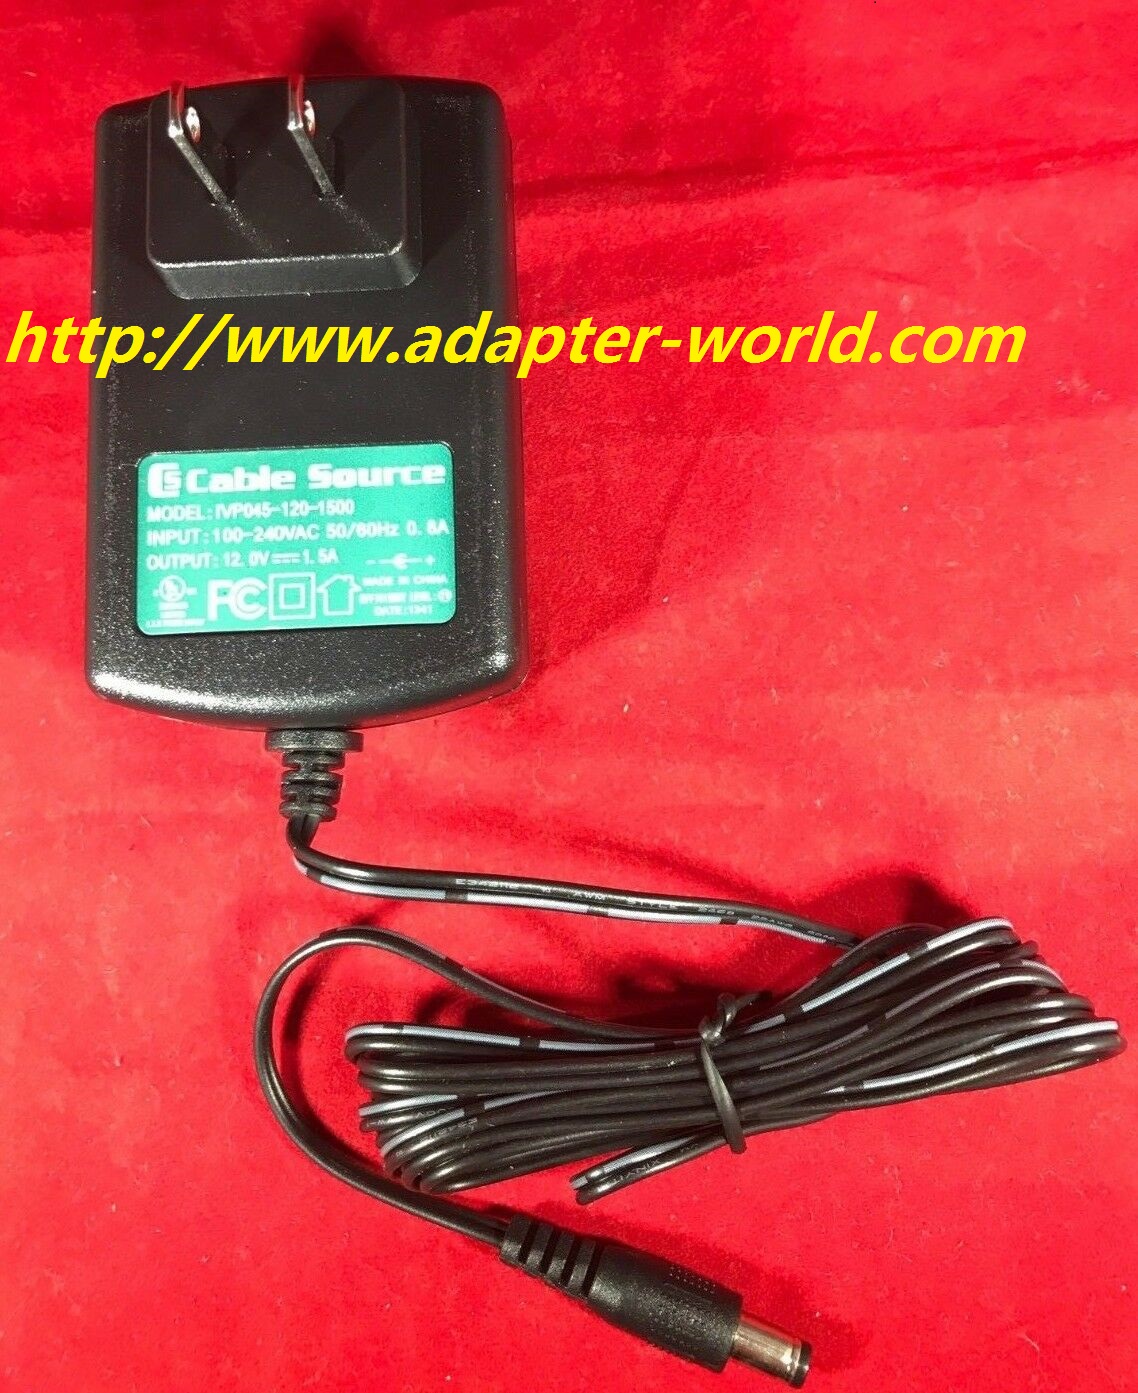 100% Brand NEW Cable Source Output 12V 1.5A IVP045-120-1500 AC DC Power Supply Adapter Charger Free Shipping!